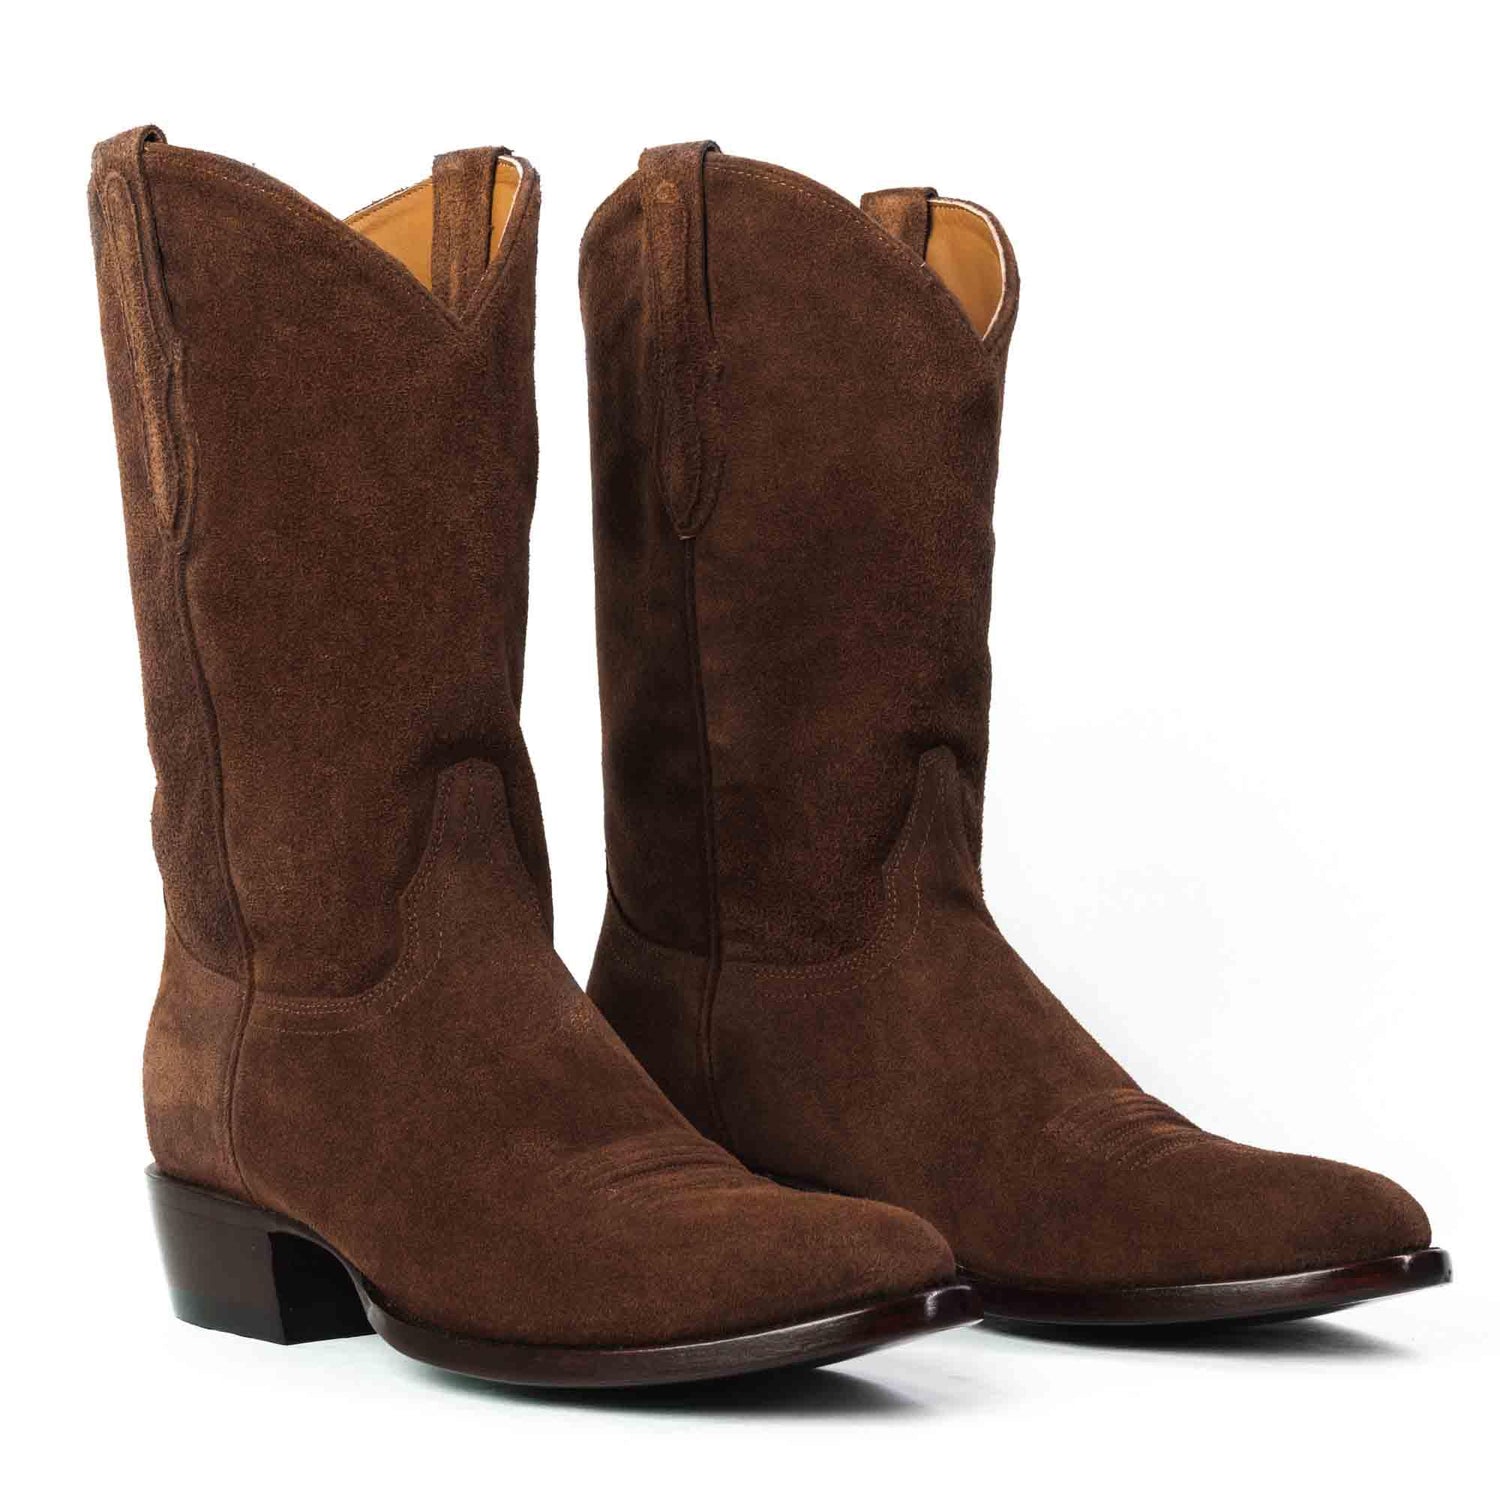 Men's Water-Resistant Suede Western Boots | The Canyon | Rujo Boots